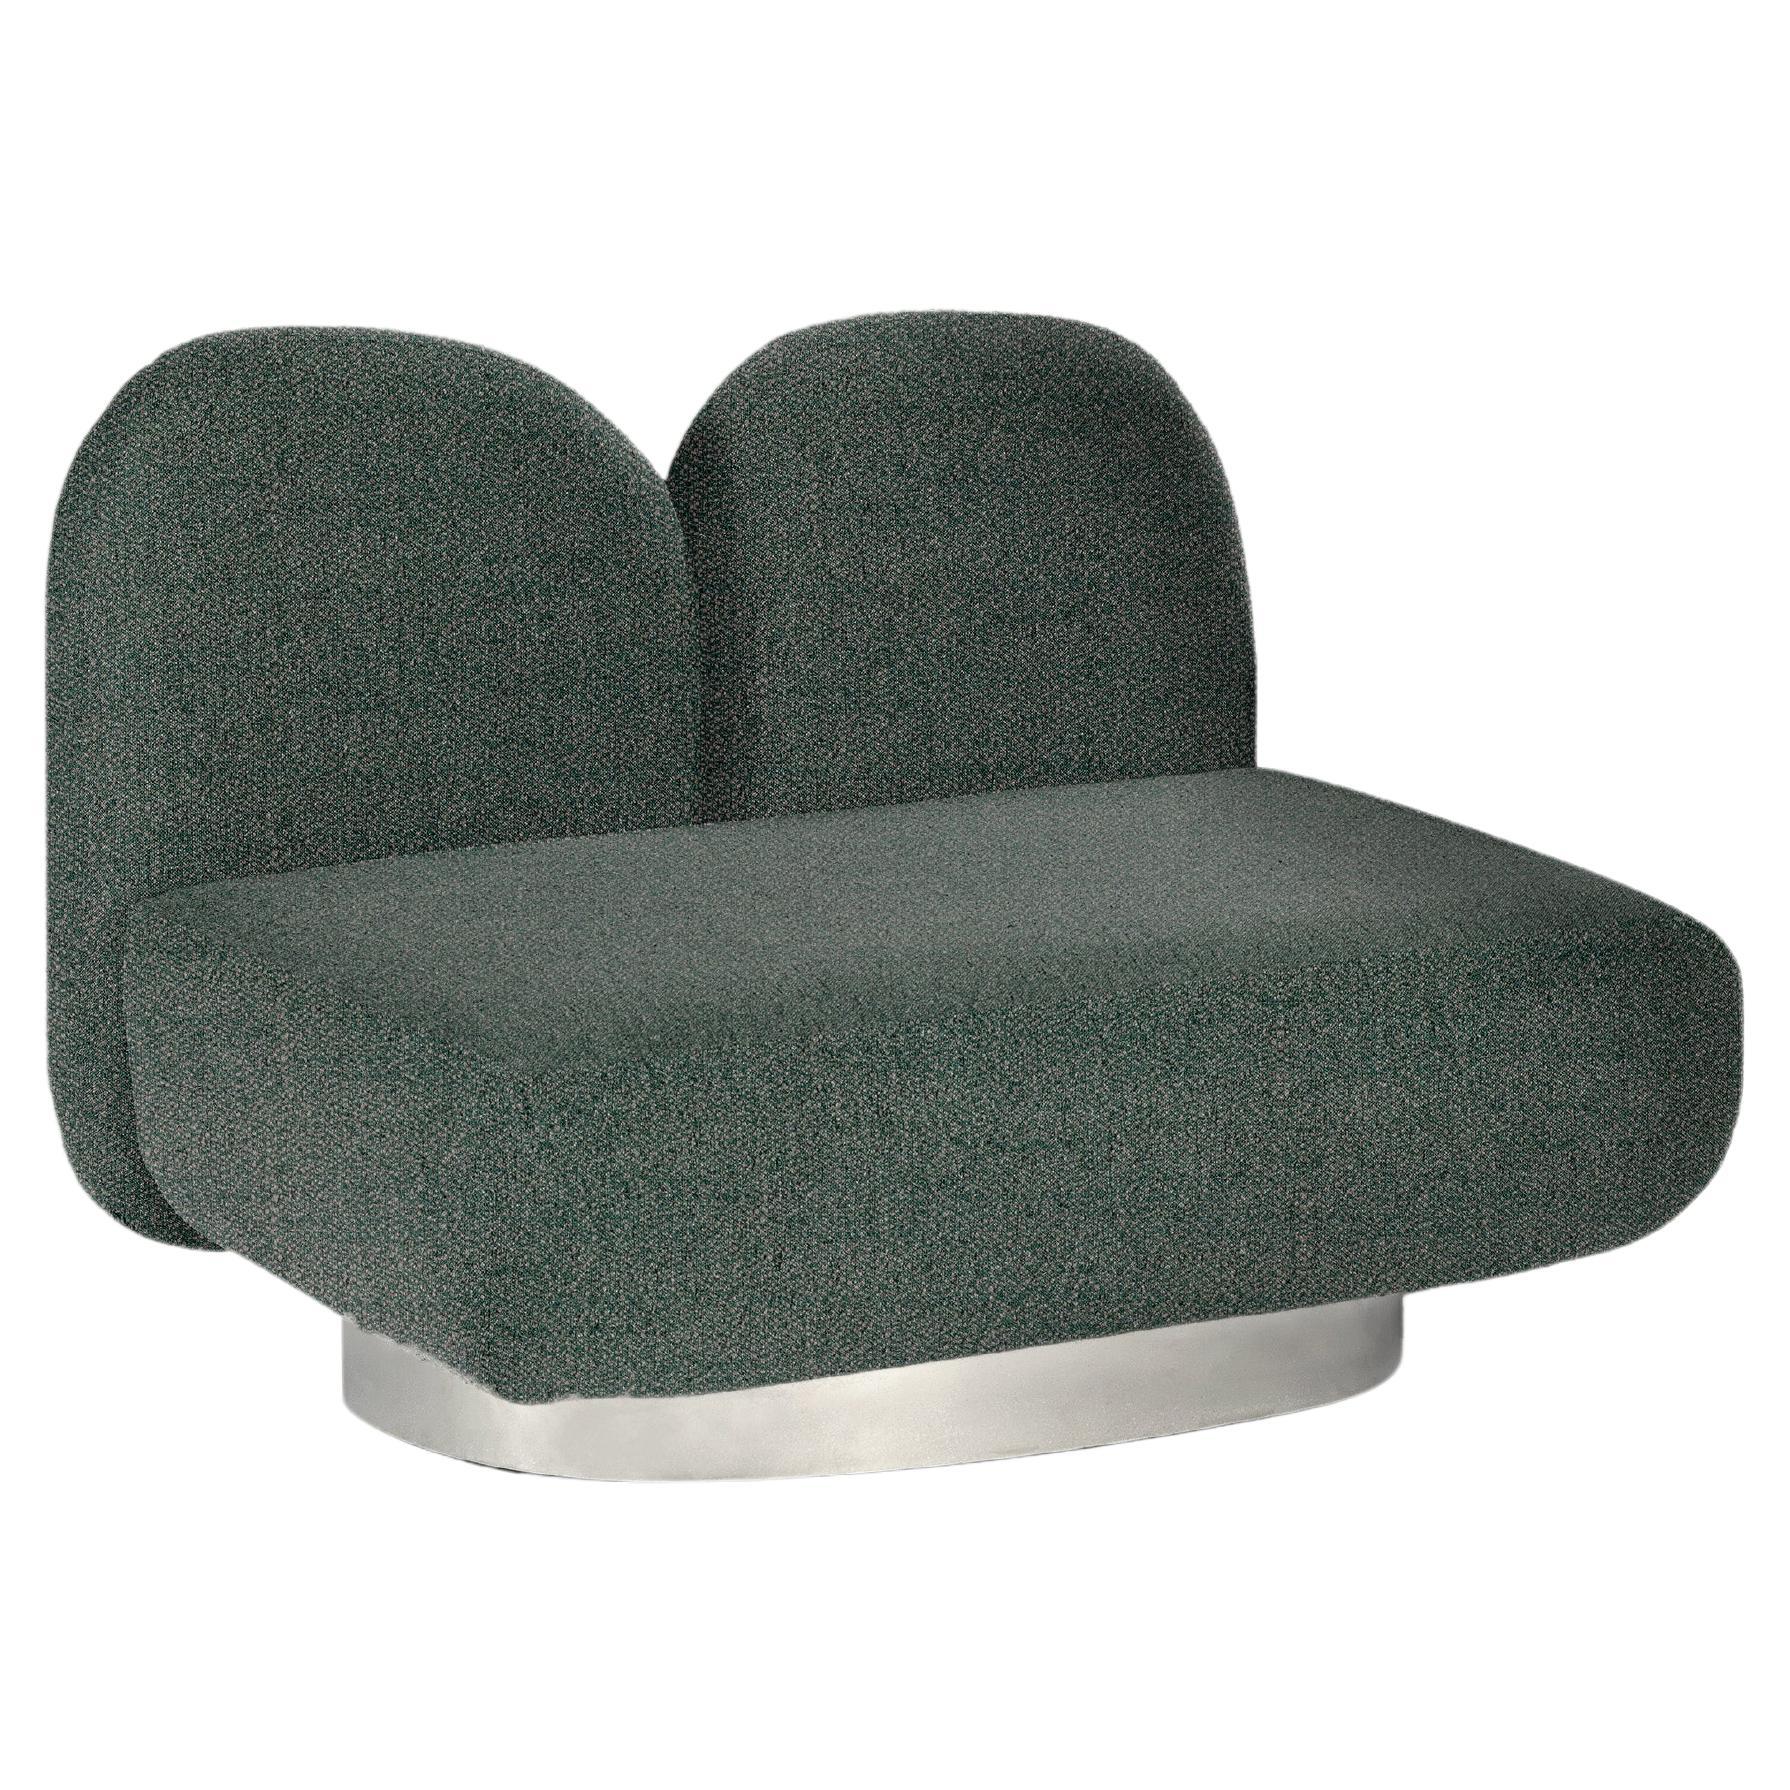 Contemporary Sofa 'Assemble' by Destroyers/Builders, 1 seater For Sale